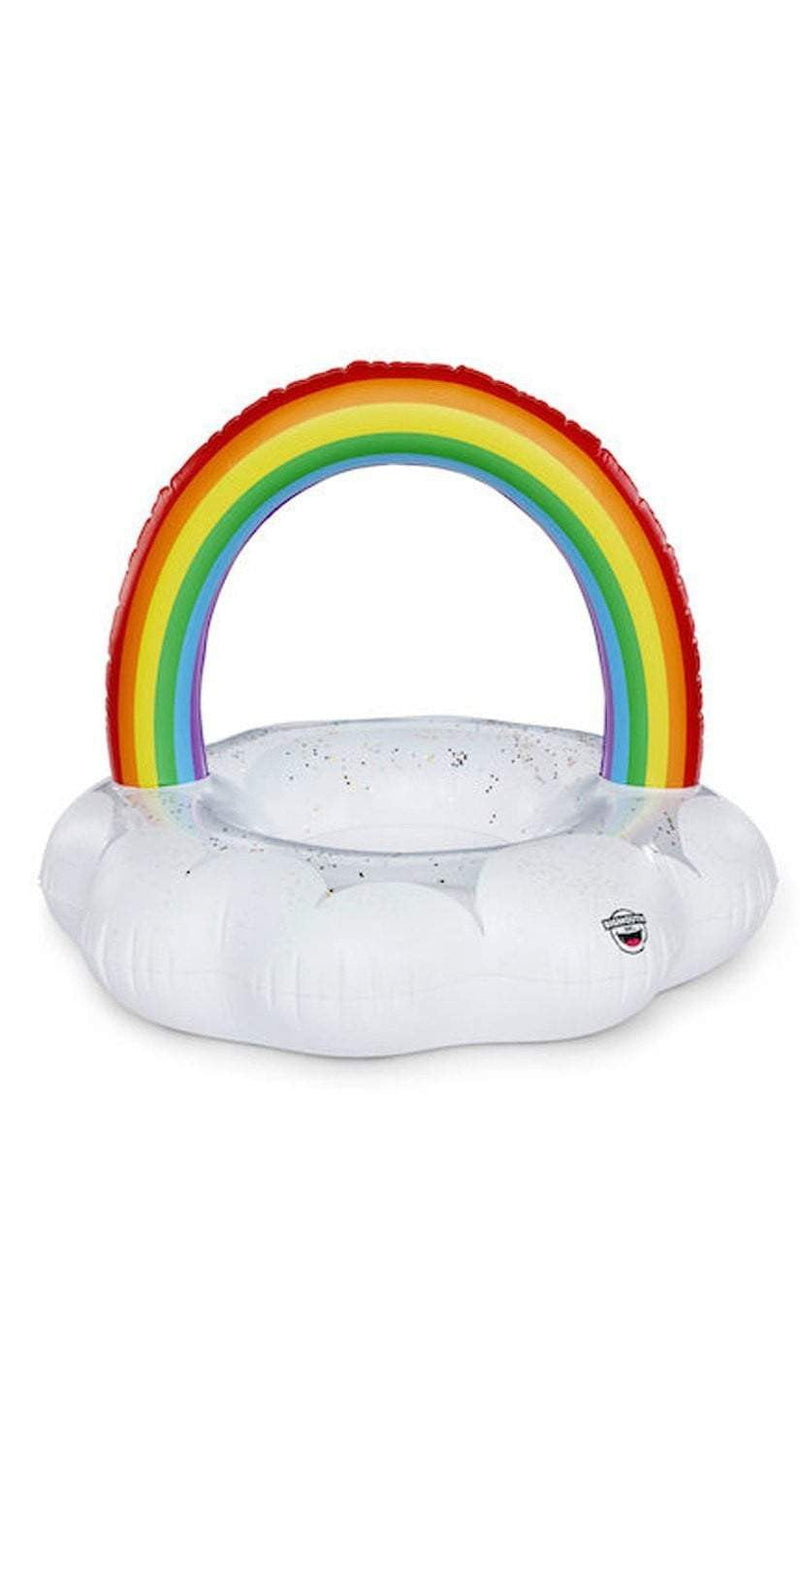 Big Mouth Giant Rainbow Cloud Pool Float BMPF-0012: